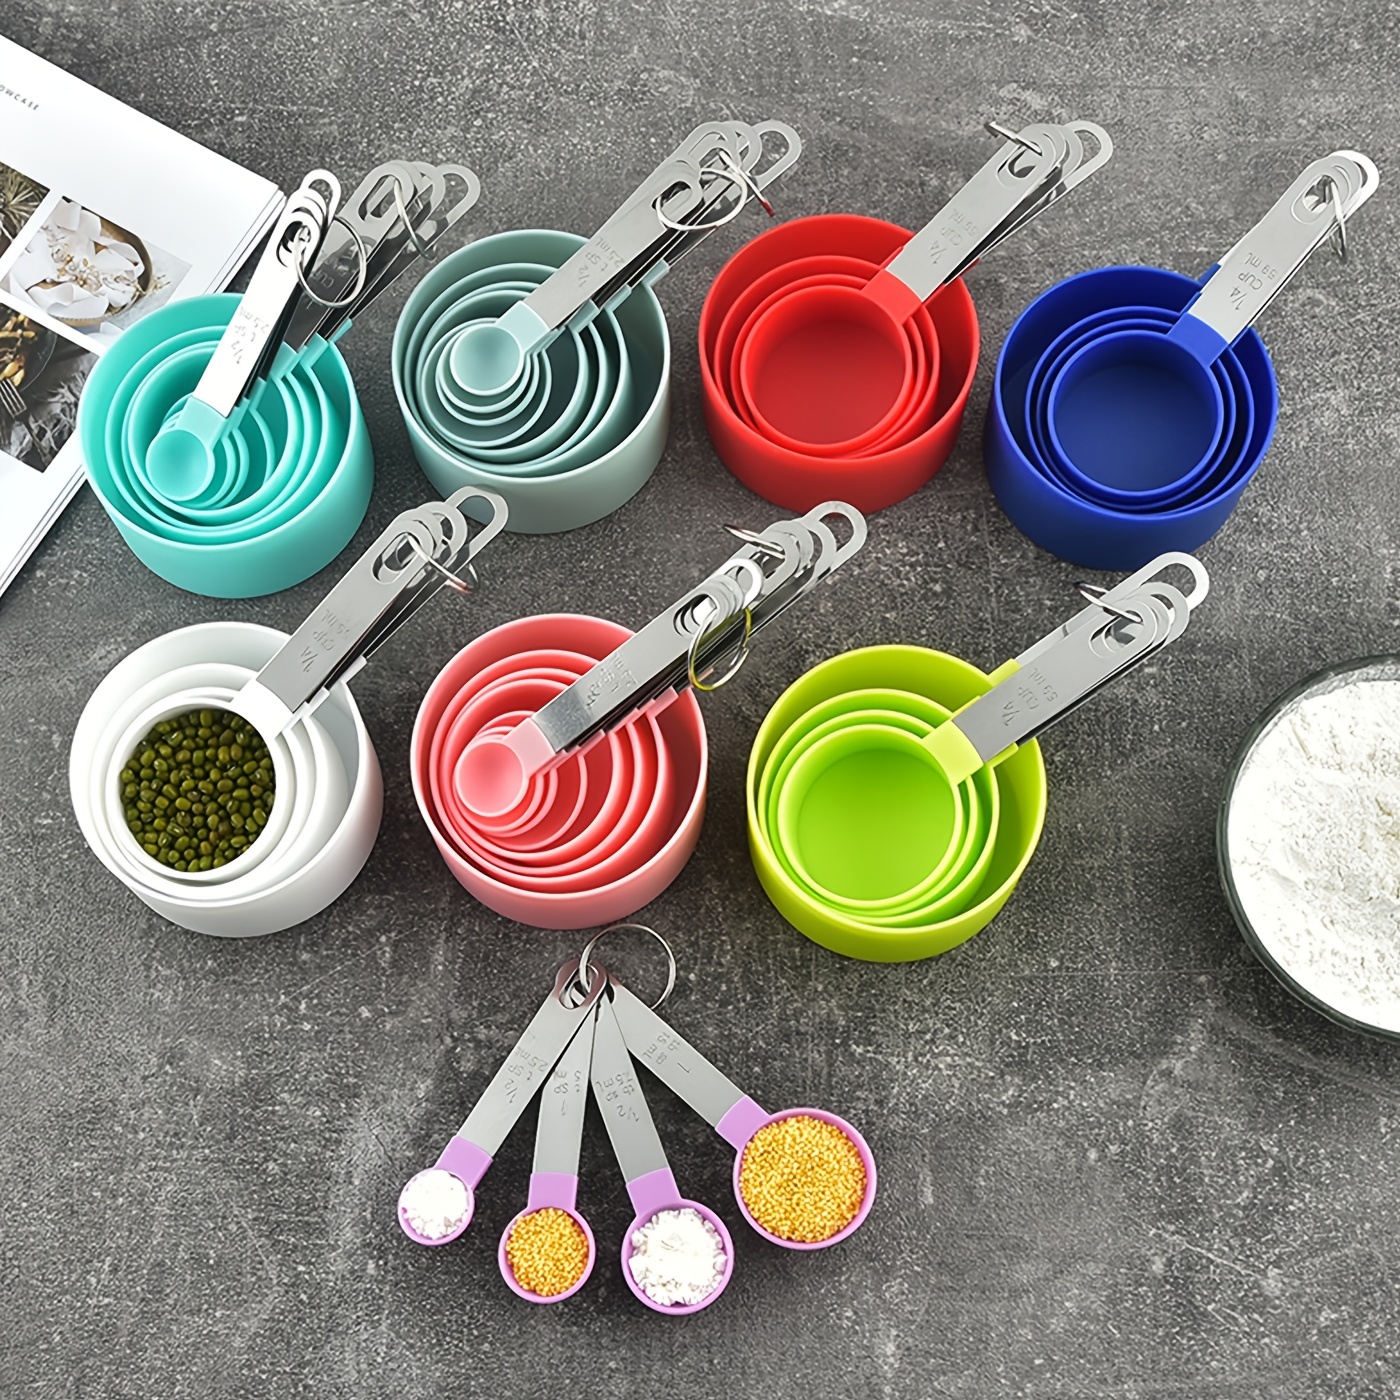 Stainless Steel Measuring Cups and Spoons Set: 7 Cup and 7 Spoon Metal Sets of 1